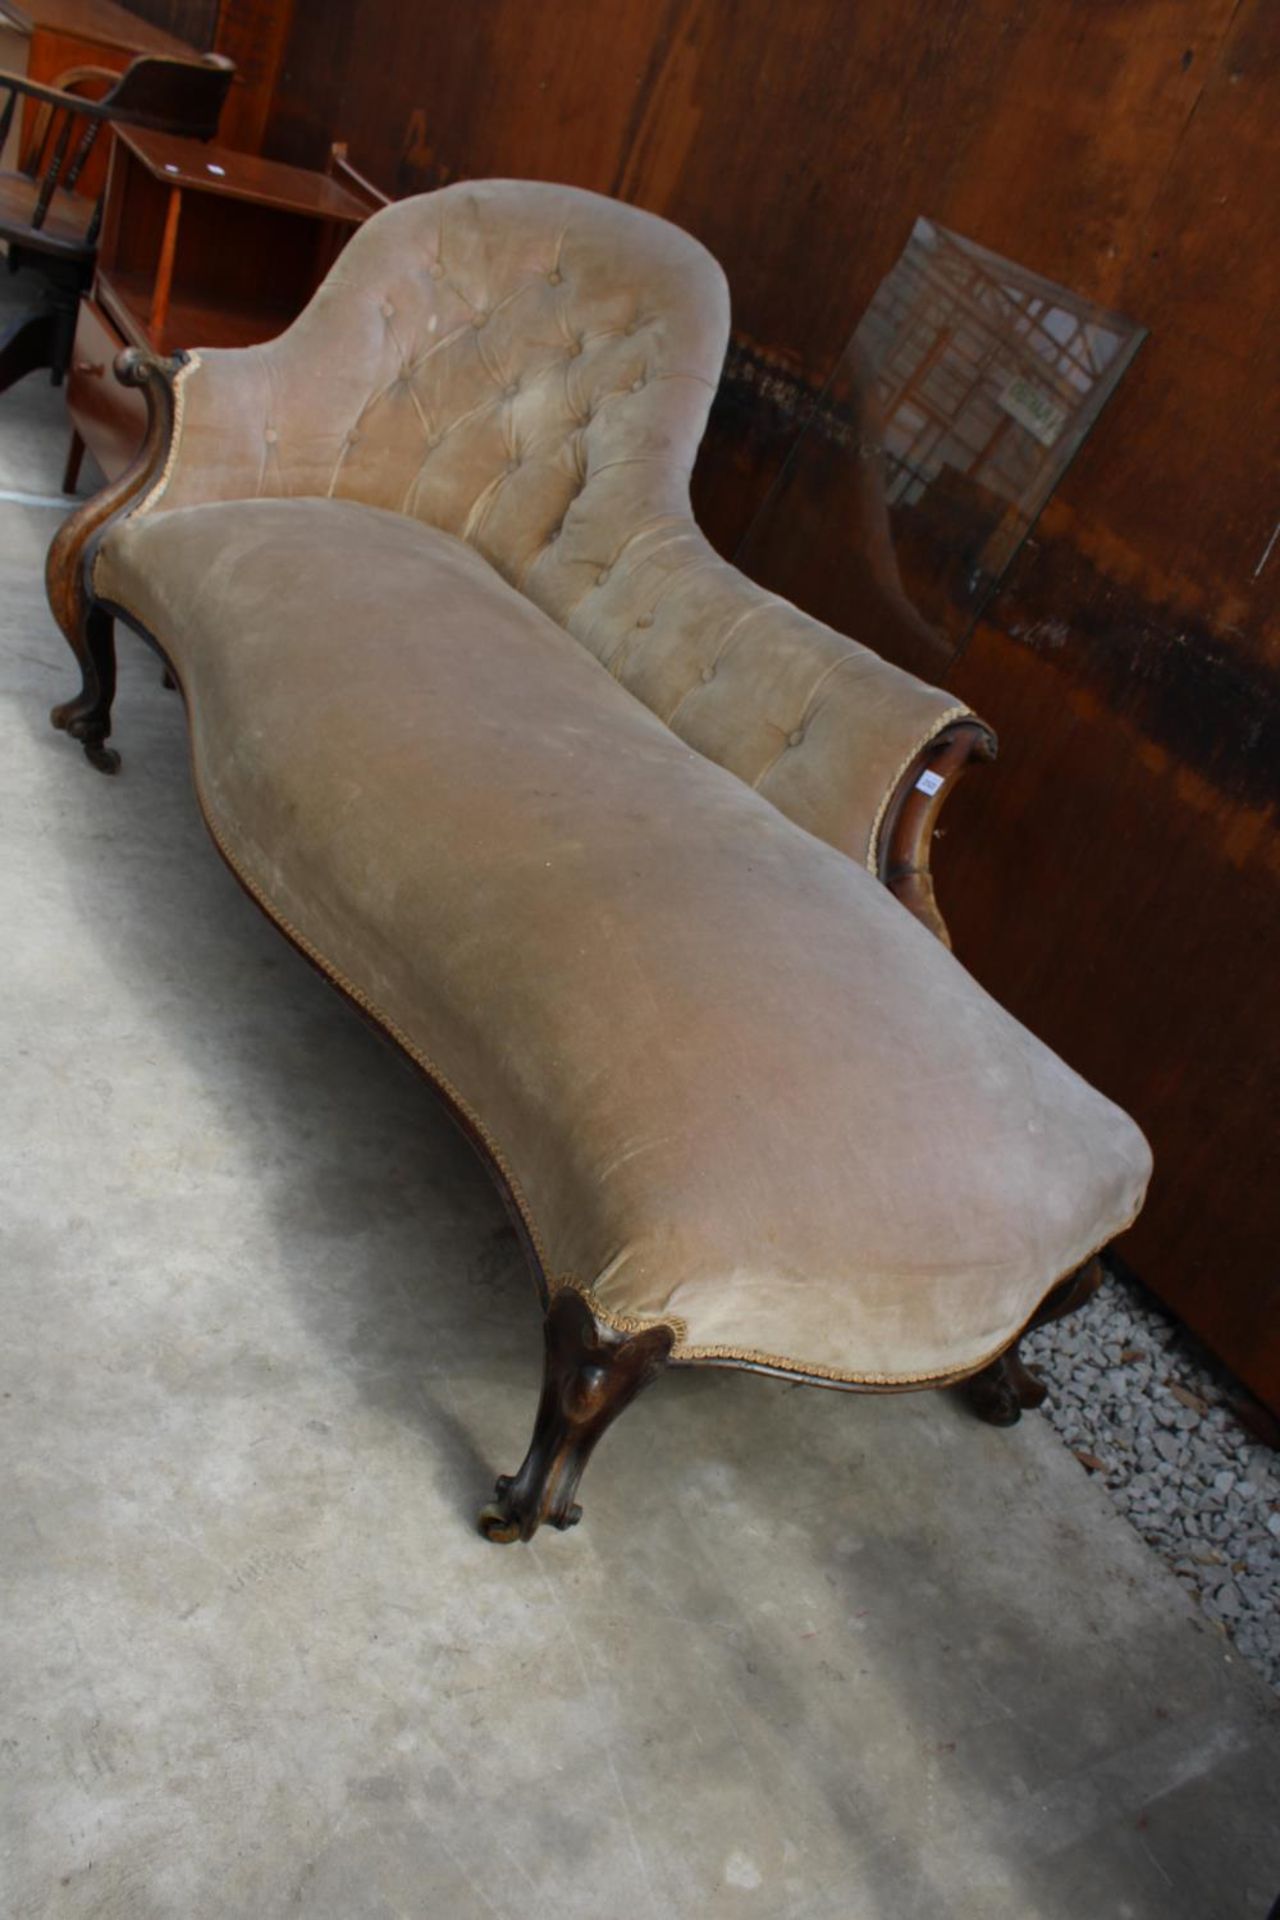 A VICTORIAN MAHOGANY CHAISE LONGUE WITH SCROLL ARM AND LEGS - Image 2 of 3